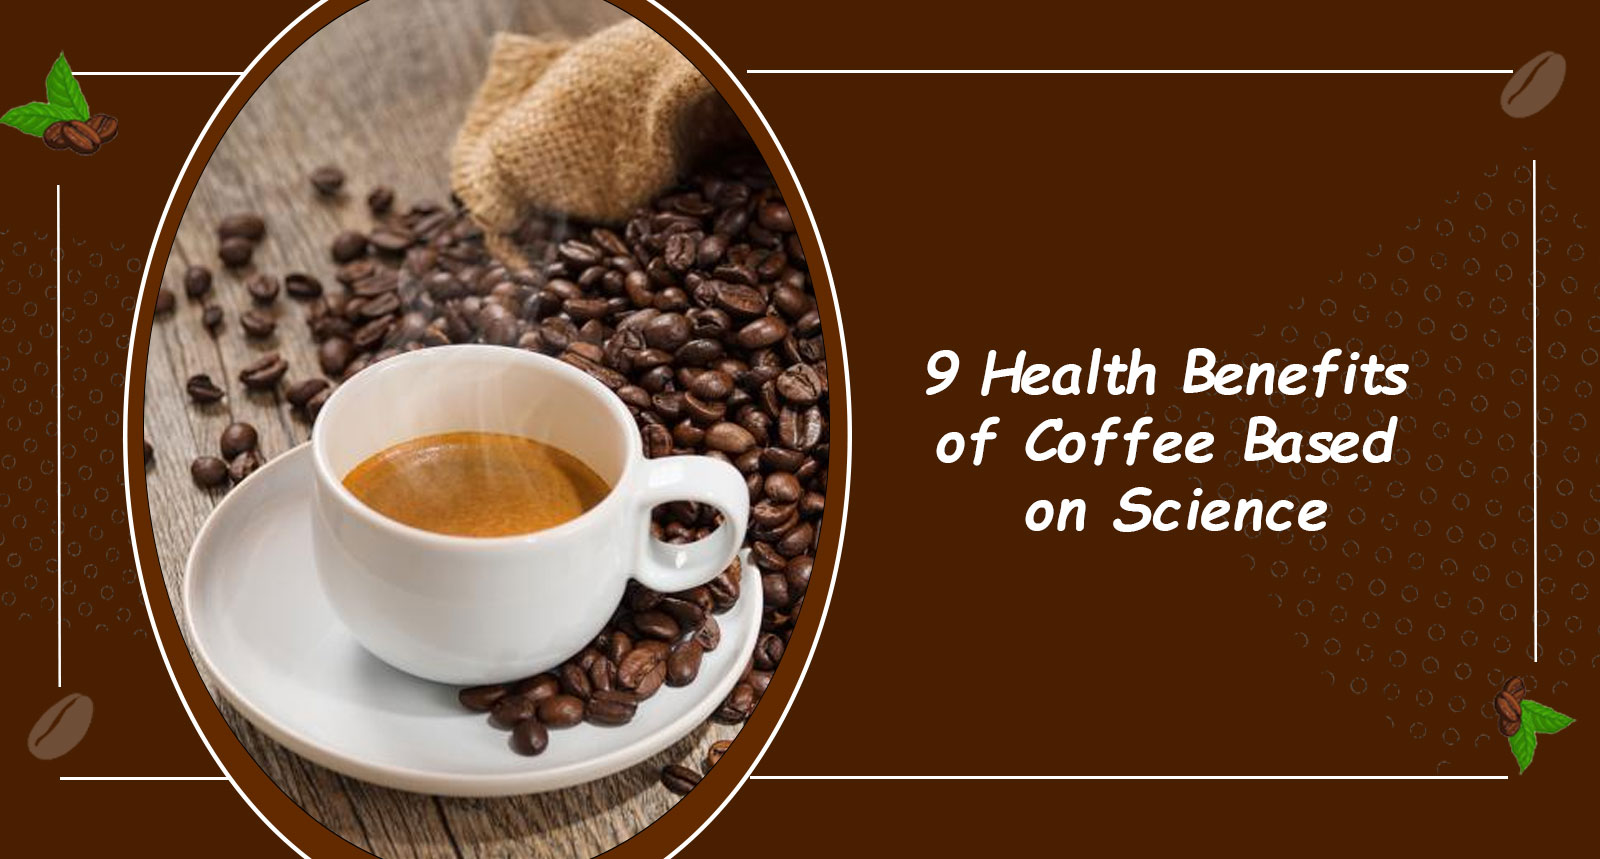 9 Health Benefits of Coffee Based on Science